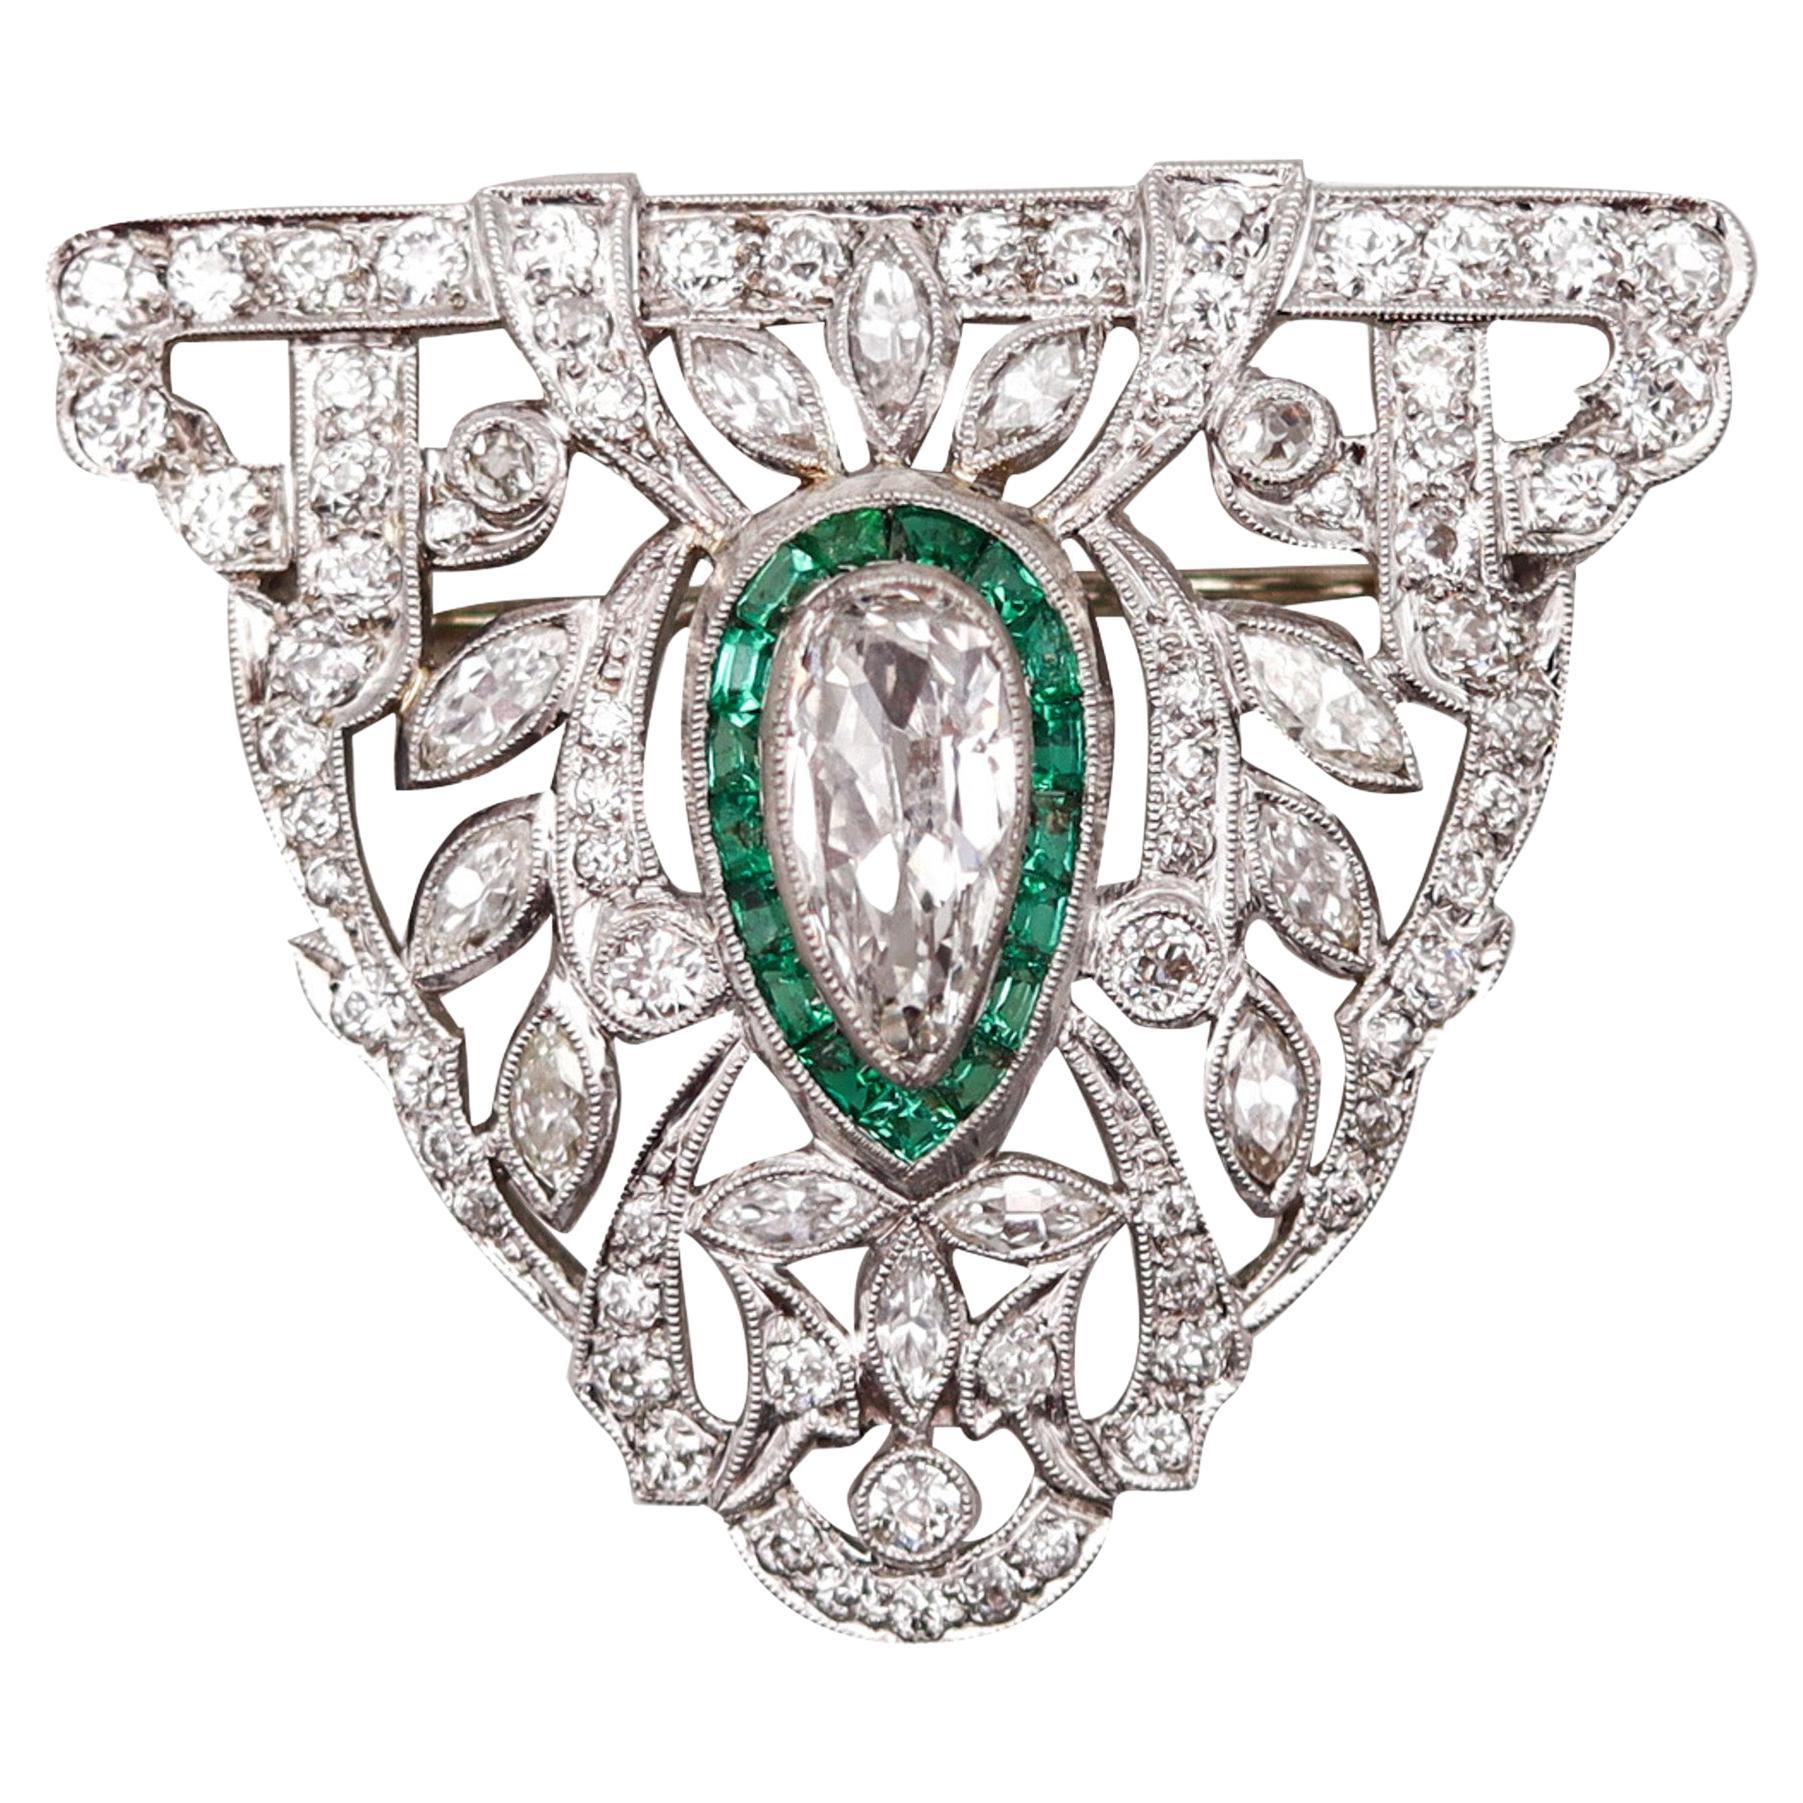 Art Deco 1930 Pendant Brooch In Platinum With 5.01 Ctw In Diamonds And Emeralds For Sale